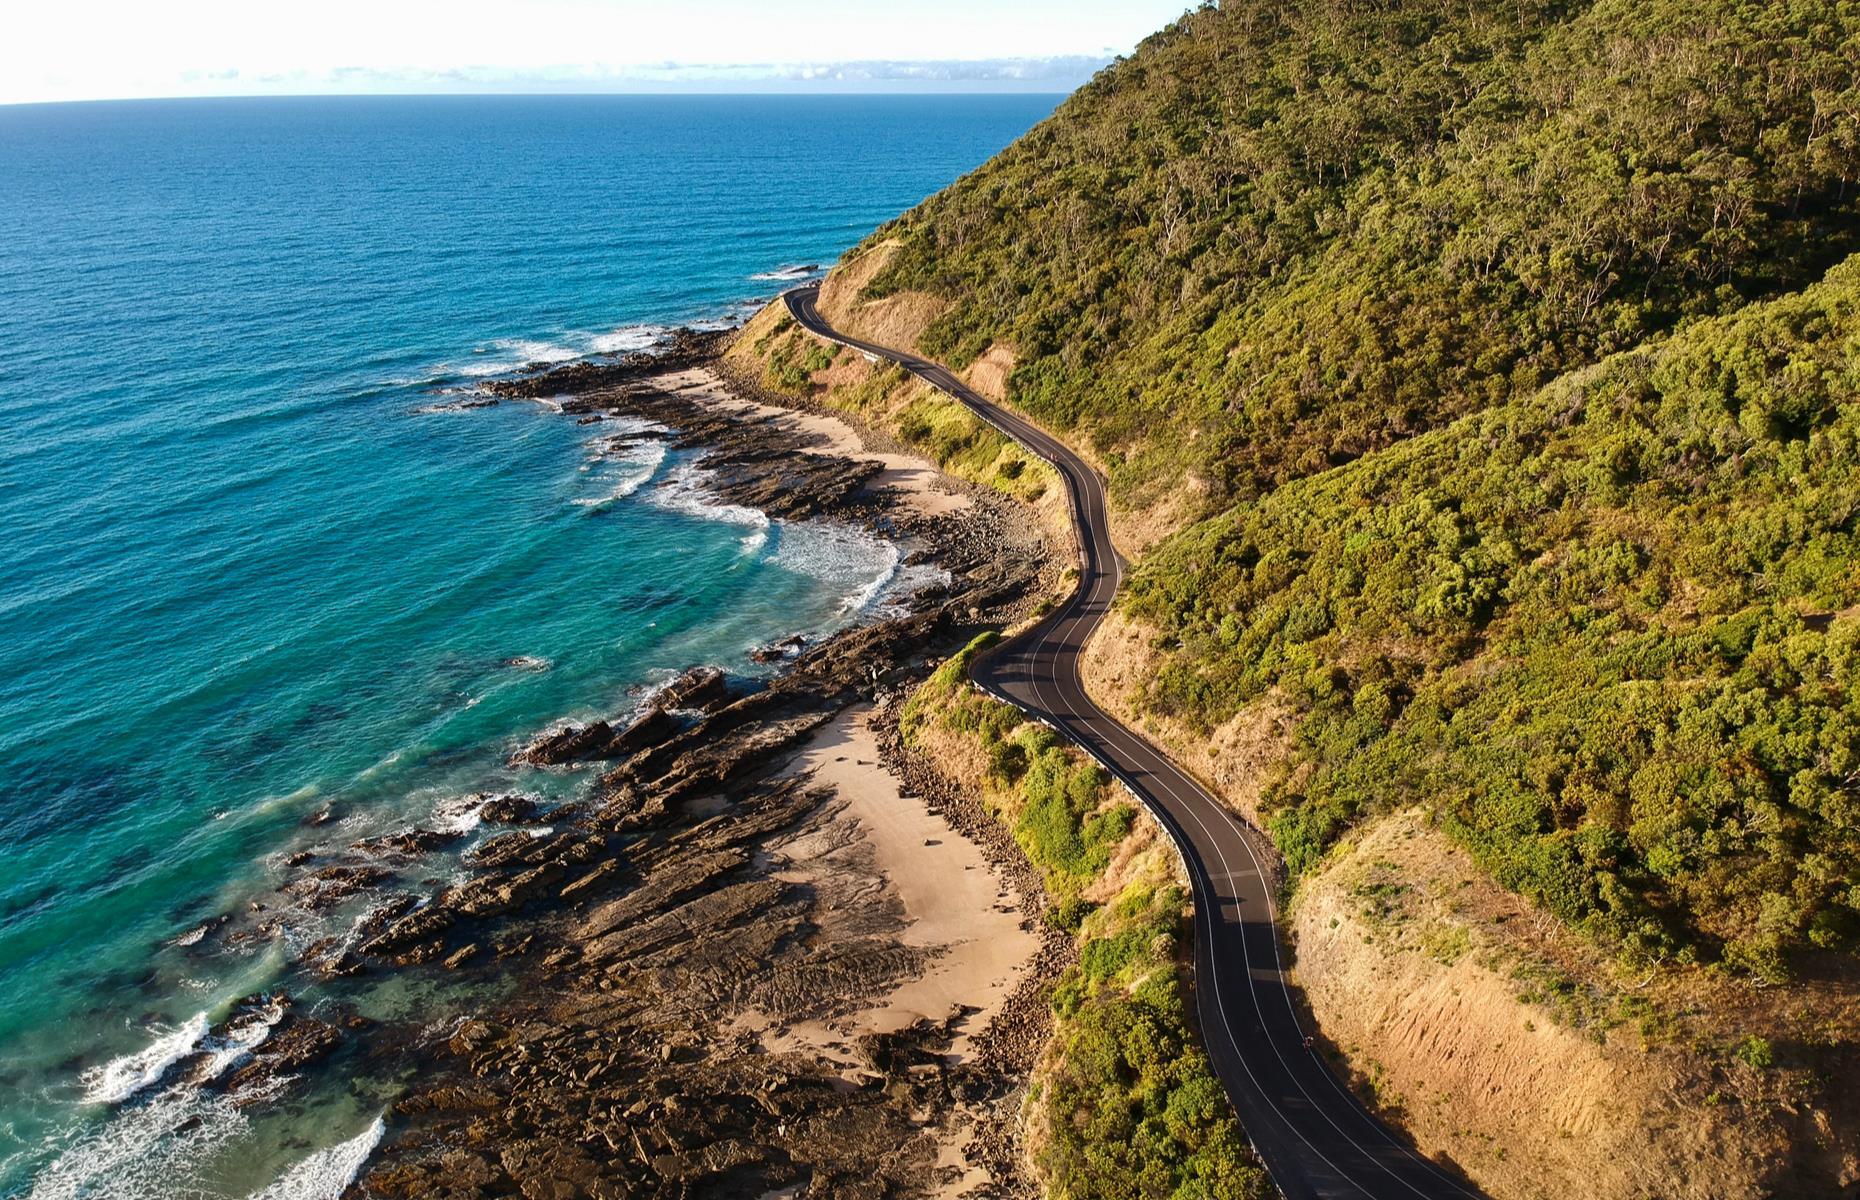 Heading off into the horizon on a road trip is an Aussie rite of passage – from cruising along sun-splashed coastal roads to tracking across dead-straight desert highways. Nothing comes close to that sense of freedom and finding a new adventure around every bend. Here are some of the ultimate drives to experience Down Under.